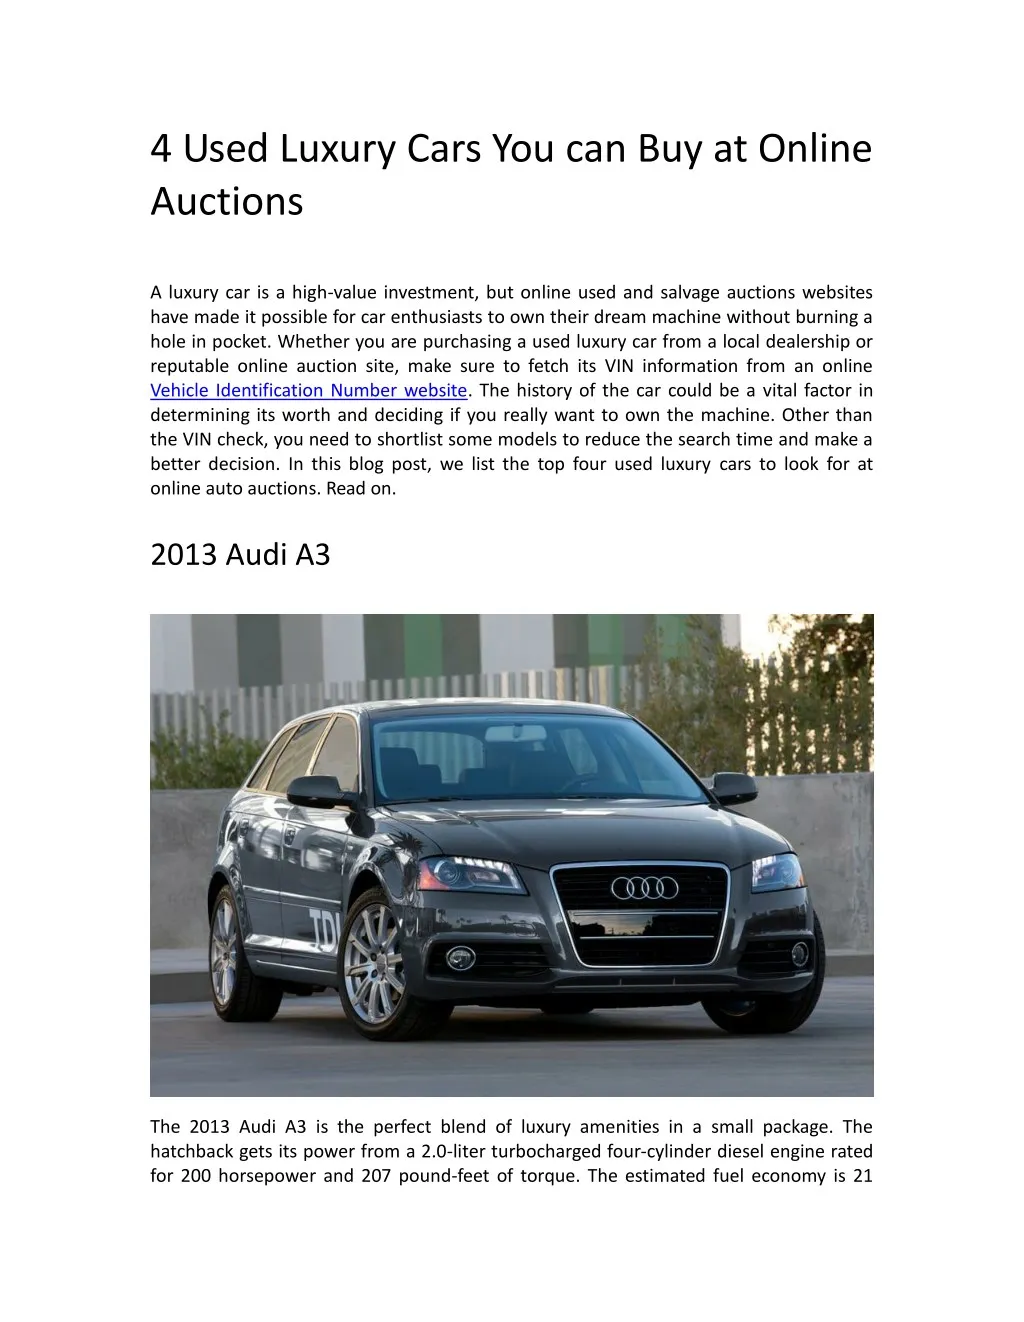 4 used luxury cars you can buy at online auctions